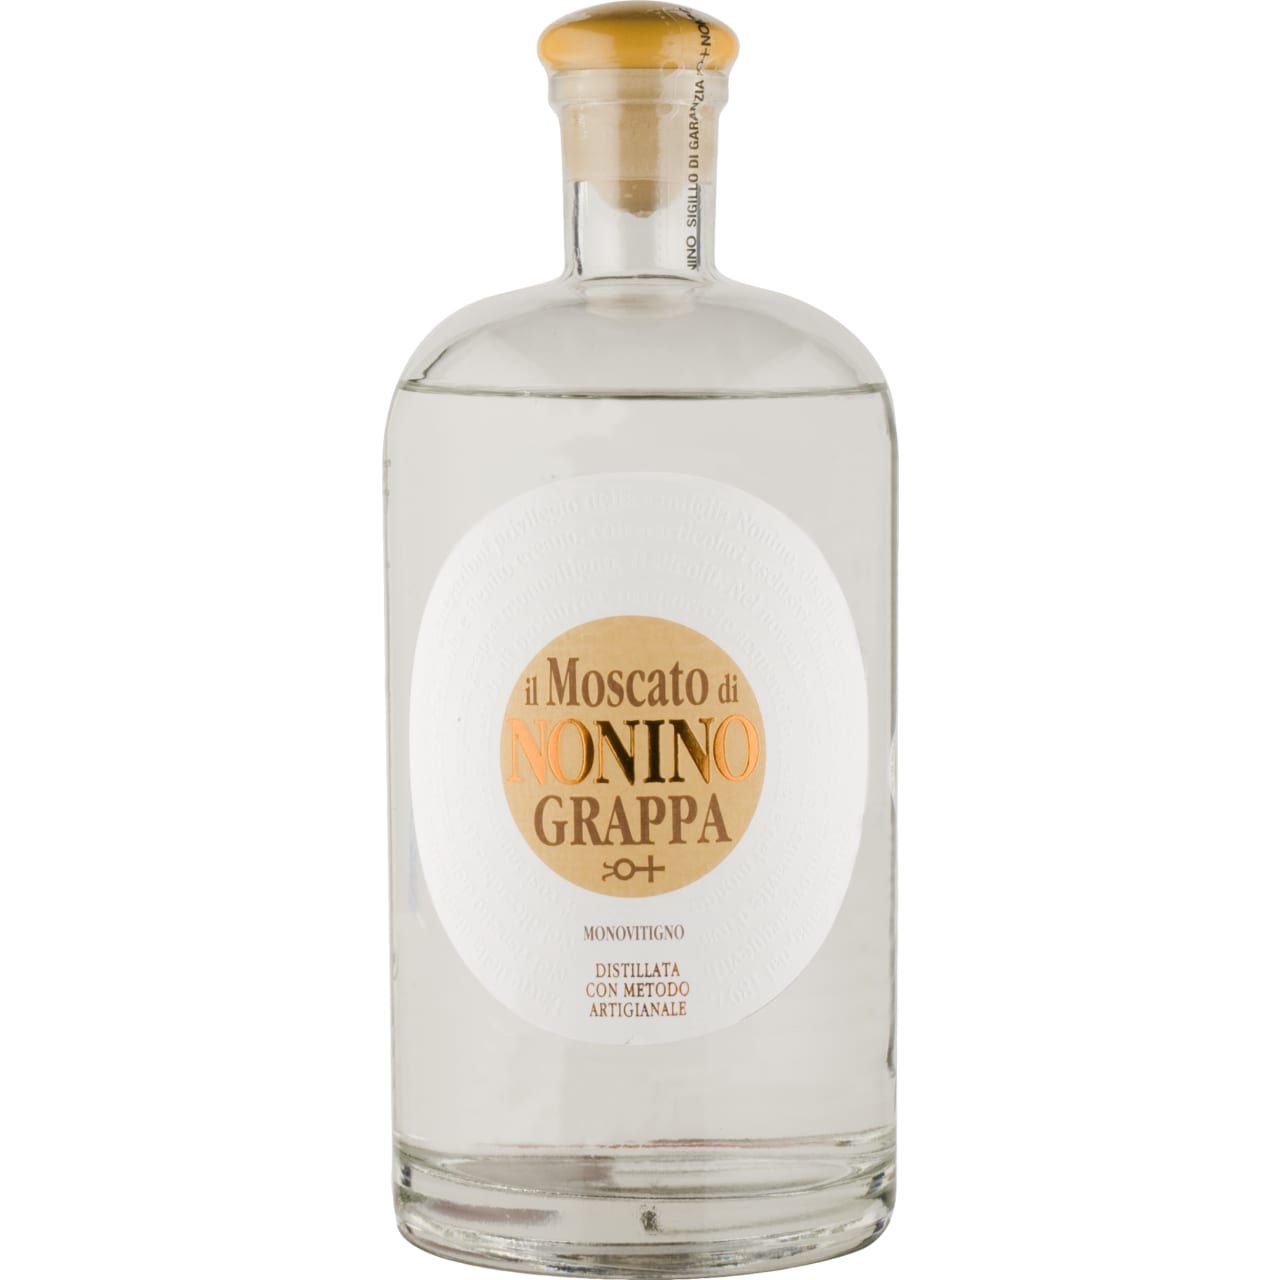 Made from Moscato grapes, this is an elegant and aromatic grappa, coming from the Nonino family, which is responsible for revolutionizing the grappa industry.